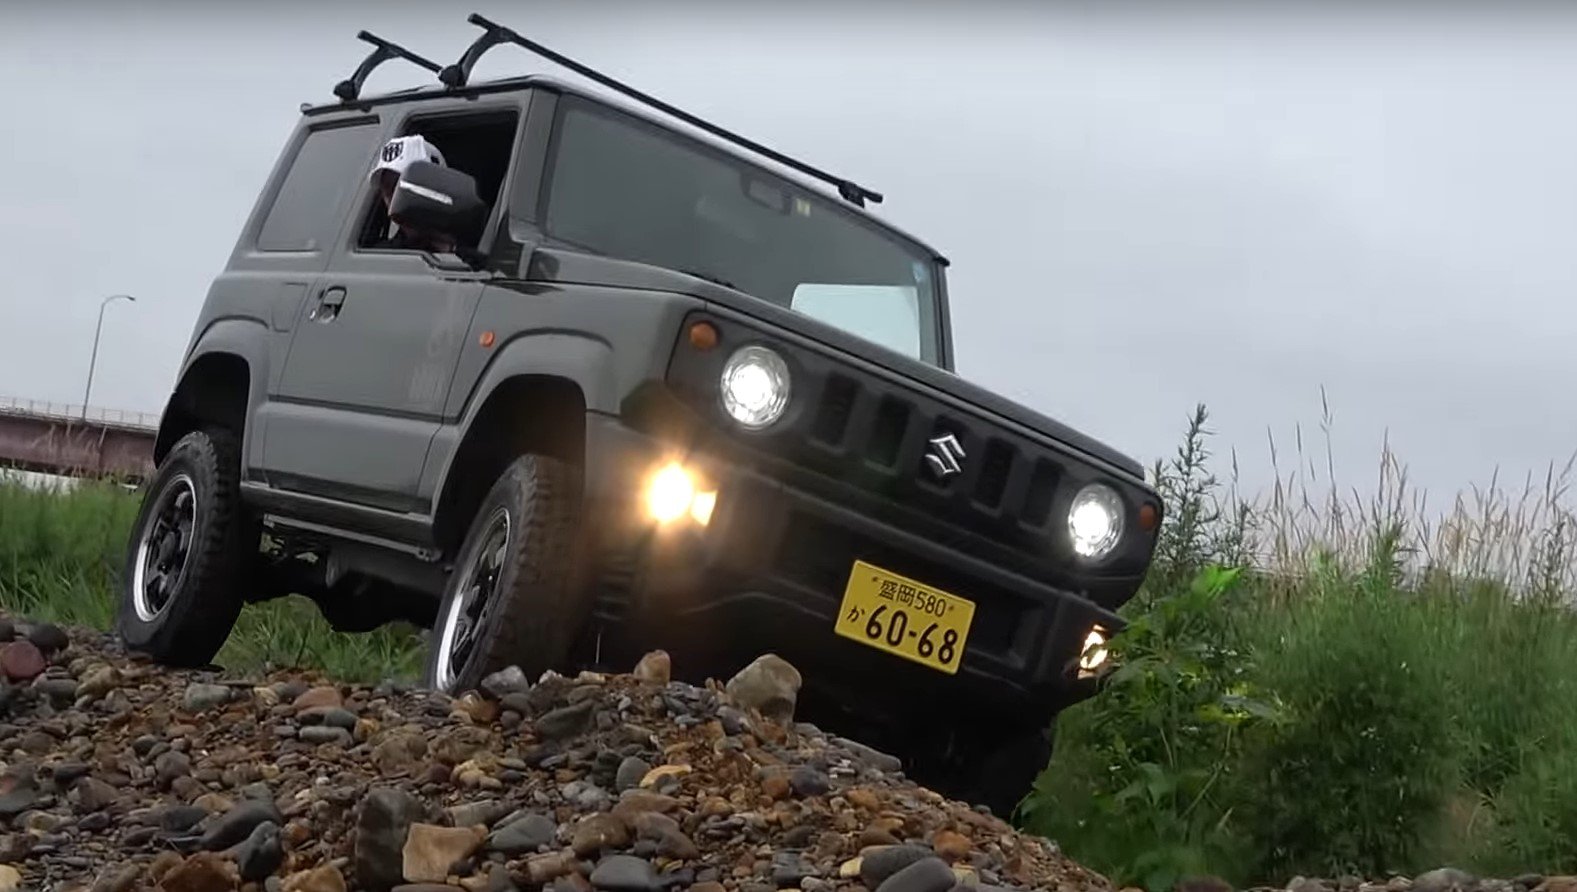 Check out the Suzuki Jimny (New Maruti Gypsy) Doing What It Does Best